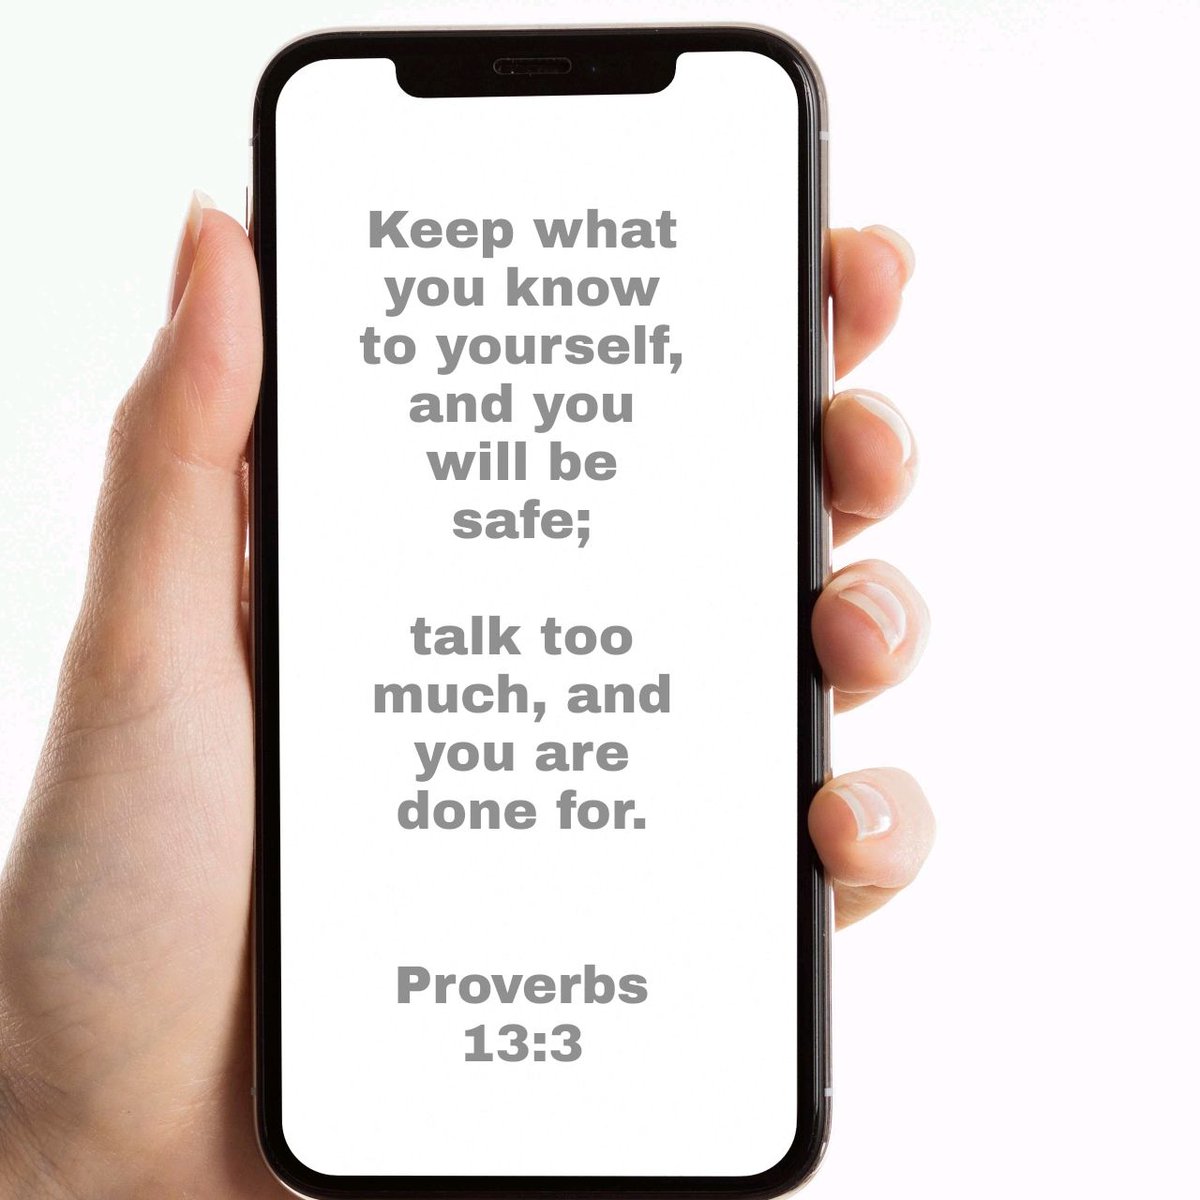 #whatyouknow #toyourself #besafe #talktoomuch
#Proverbs #CEV